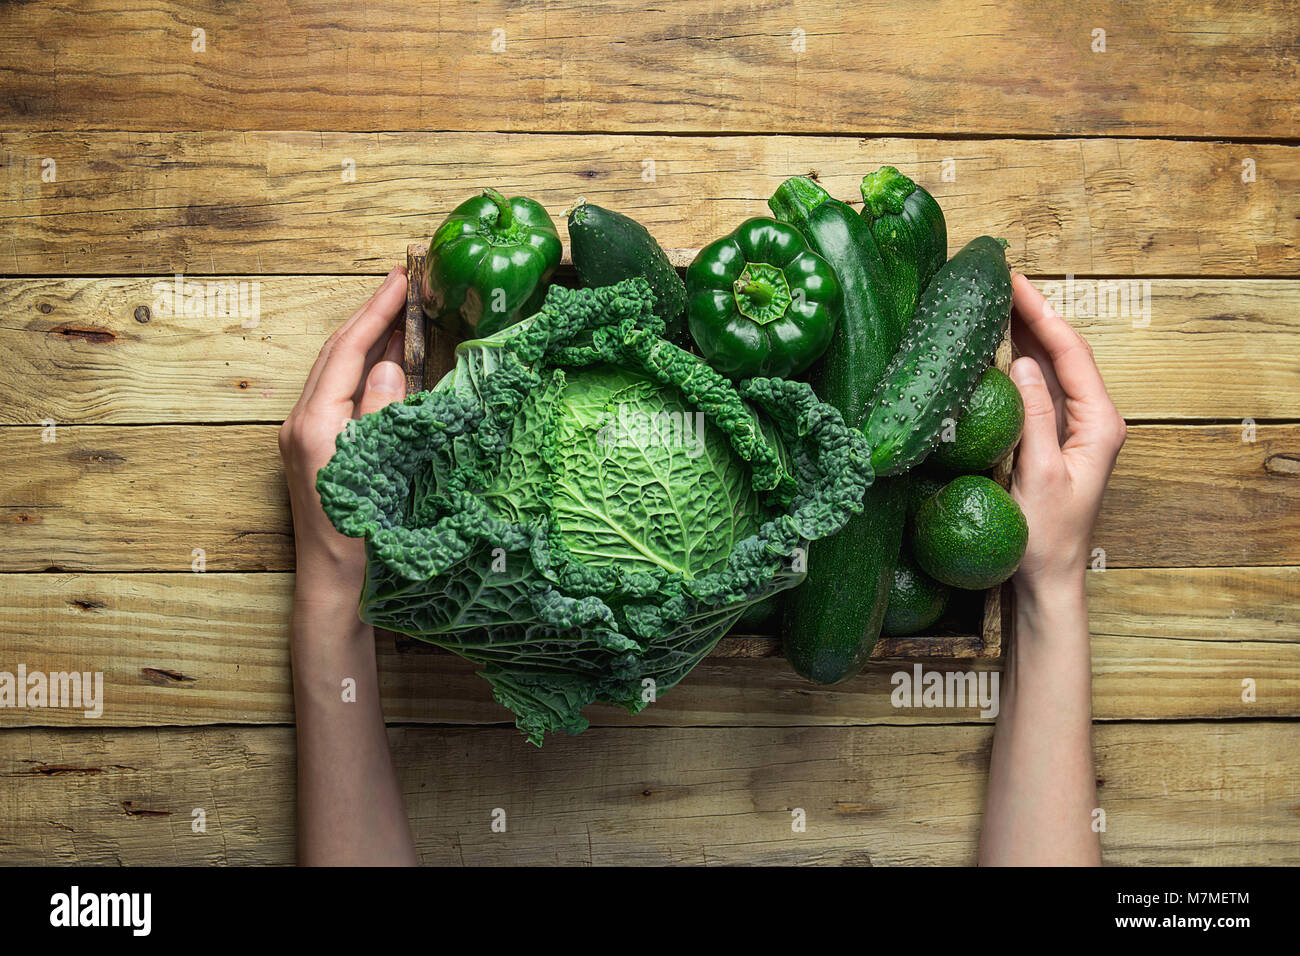 Young Woman Holding in Hand Trey with Fresh Organic Green Vegetables Savoy Cabbage Zucchini Cucumbers Bell Peppers Avocados on Aged Plank Wood Backgro Stock Photo